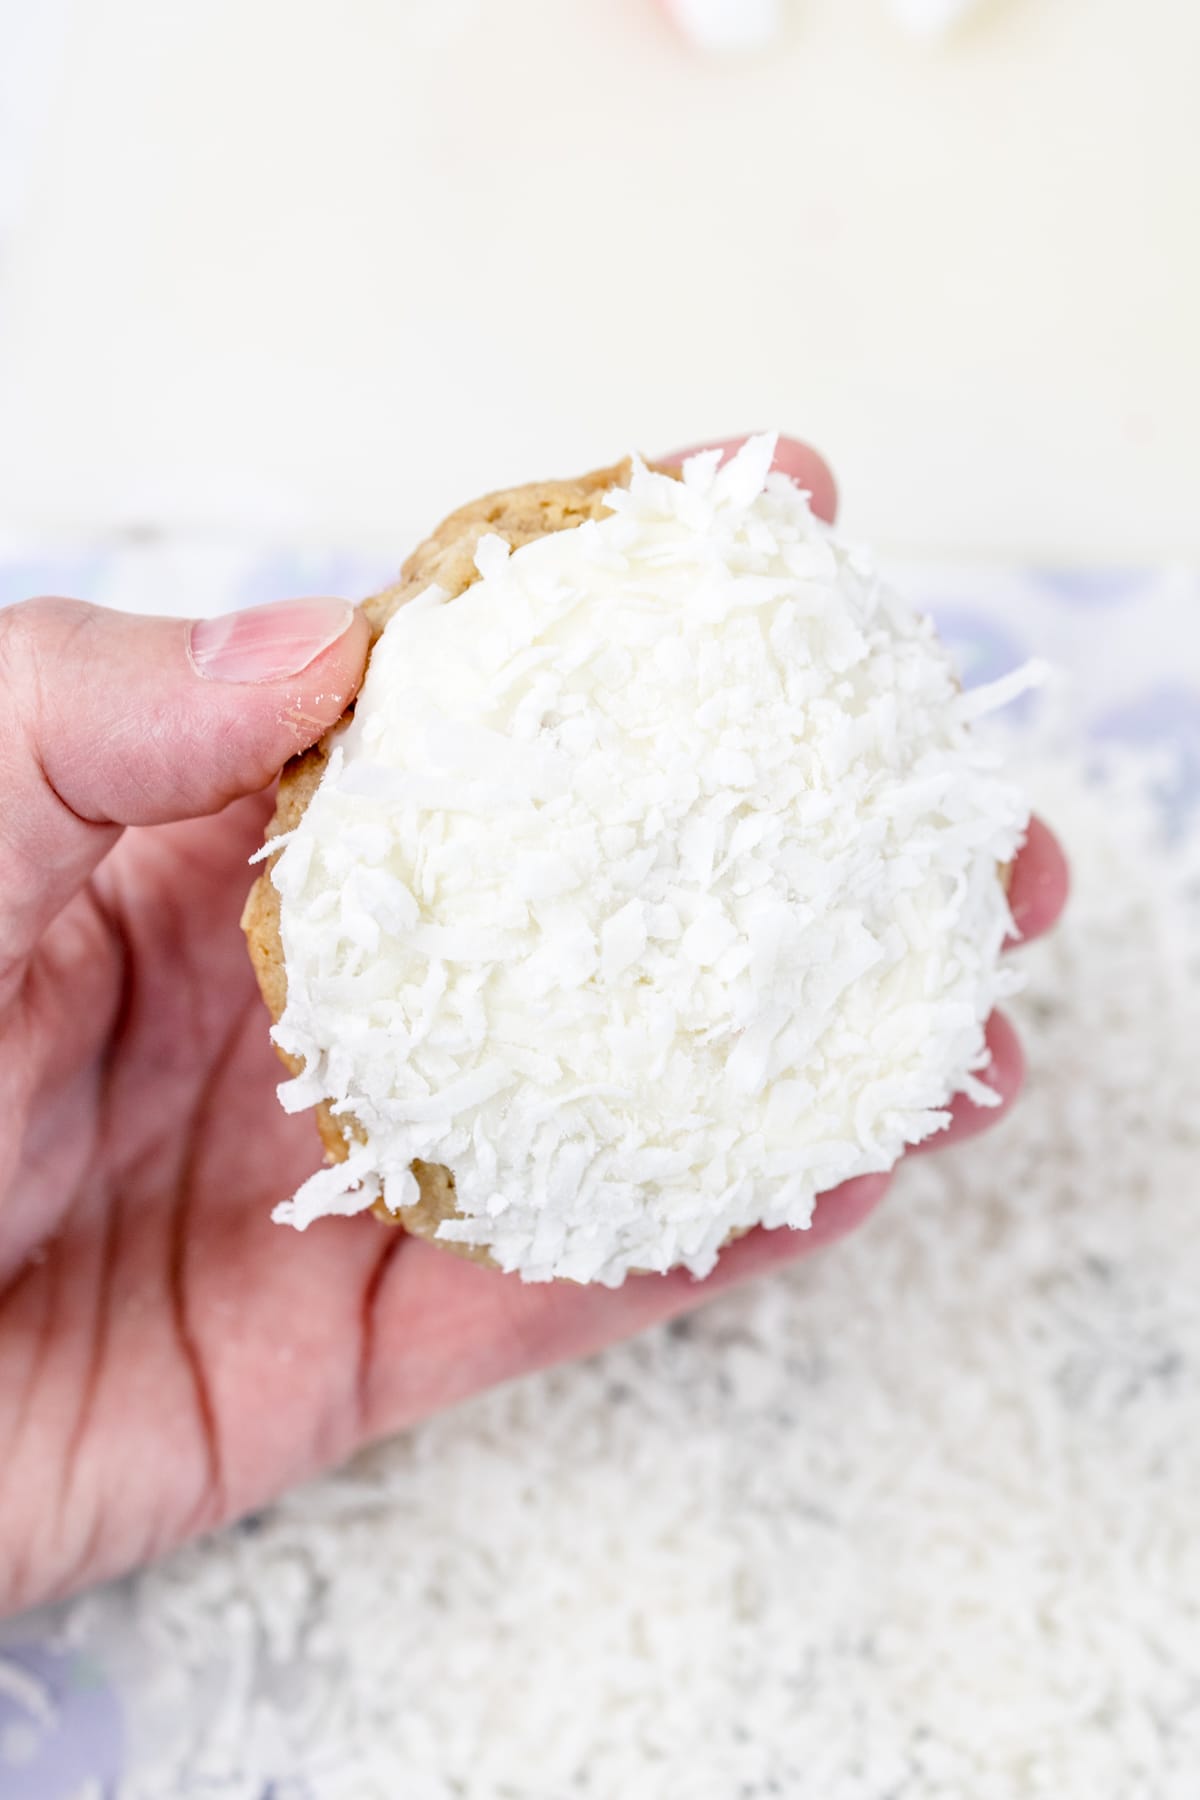 Top view of a hand holding an oatmeal cookie covered in shredded coconut.